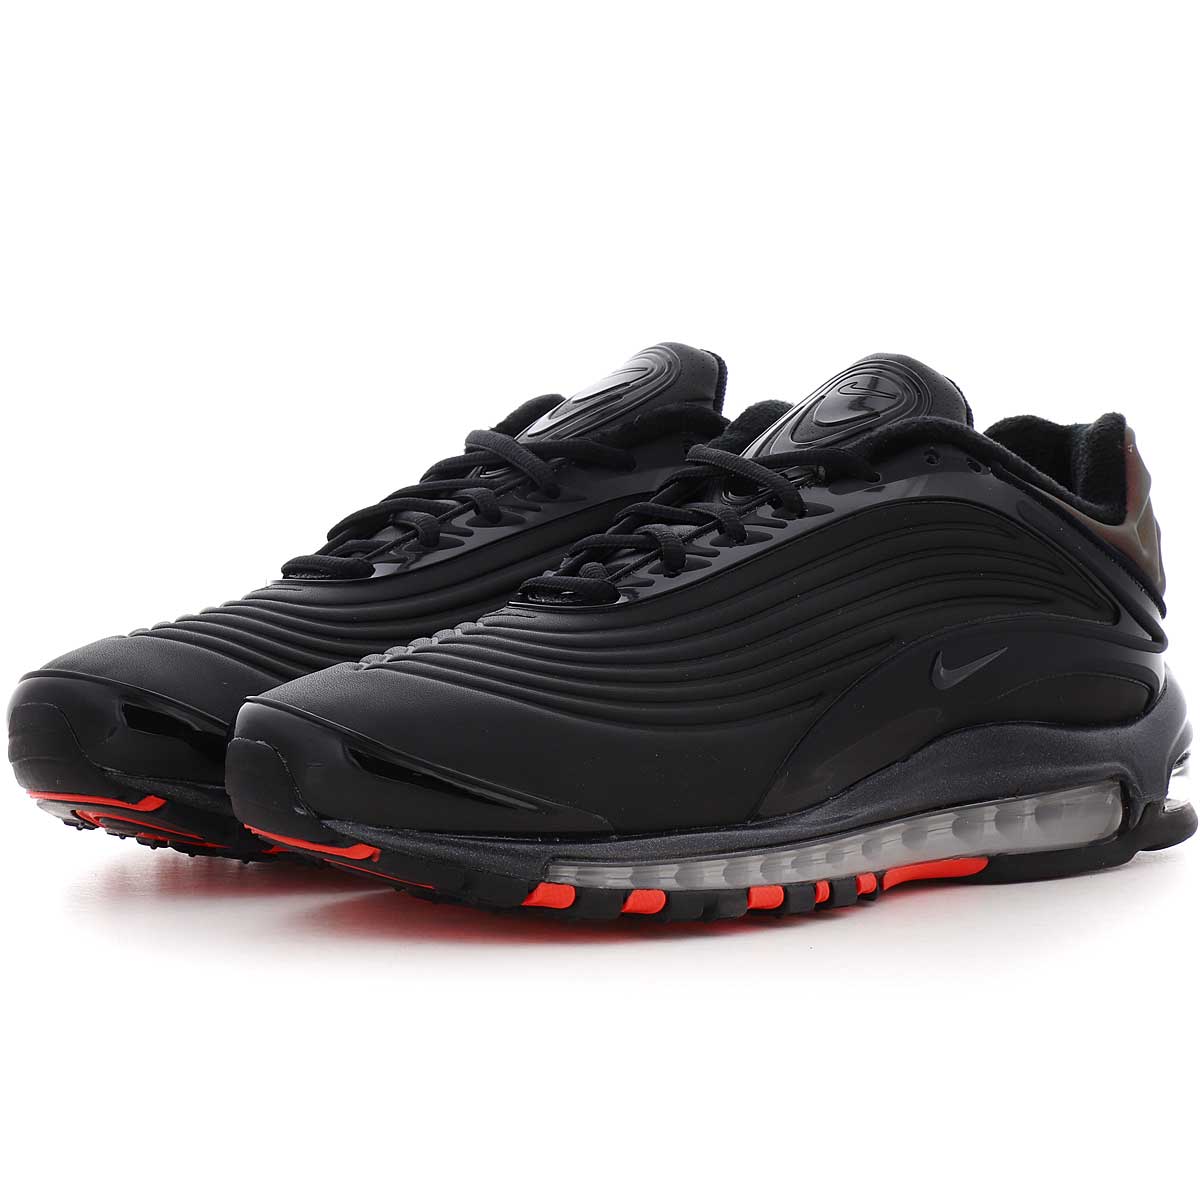 Buy AIR MAX DELUXE SE for N/A 0.0 on 